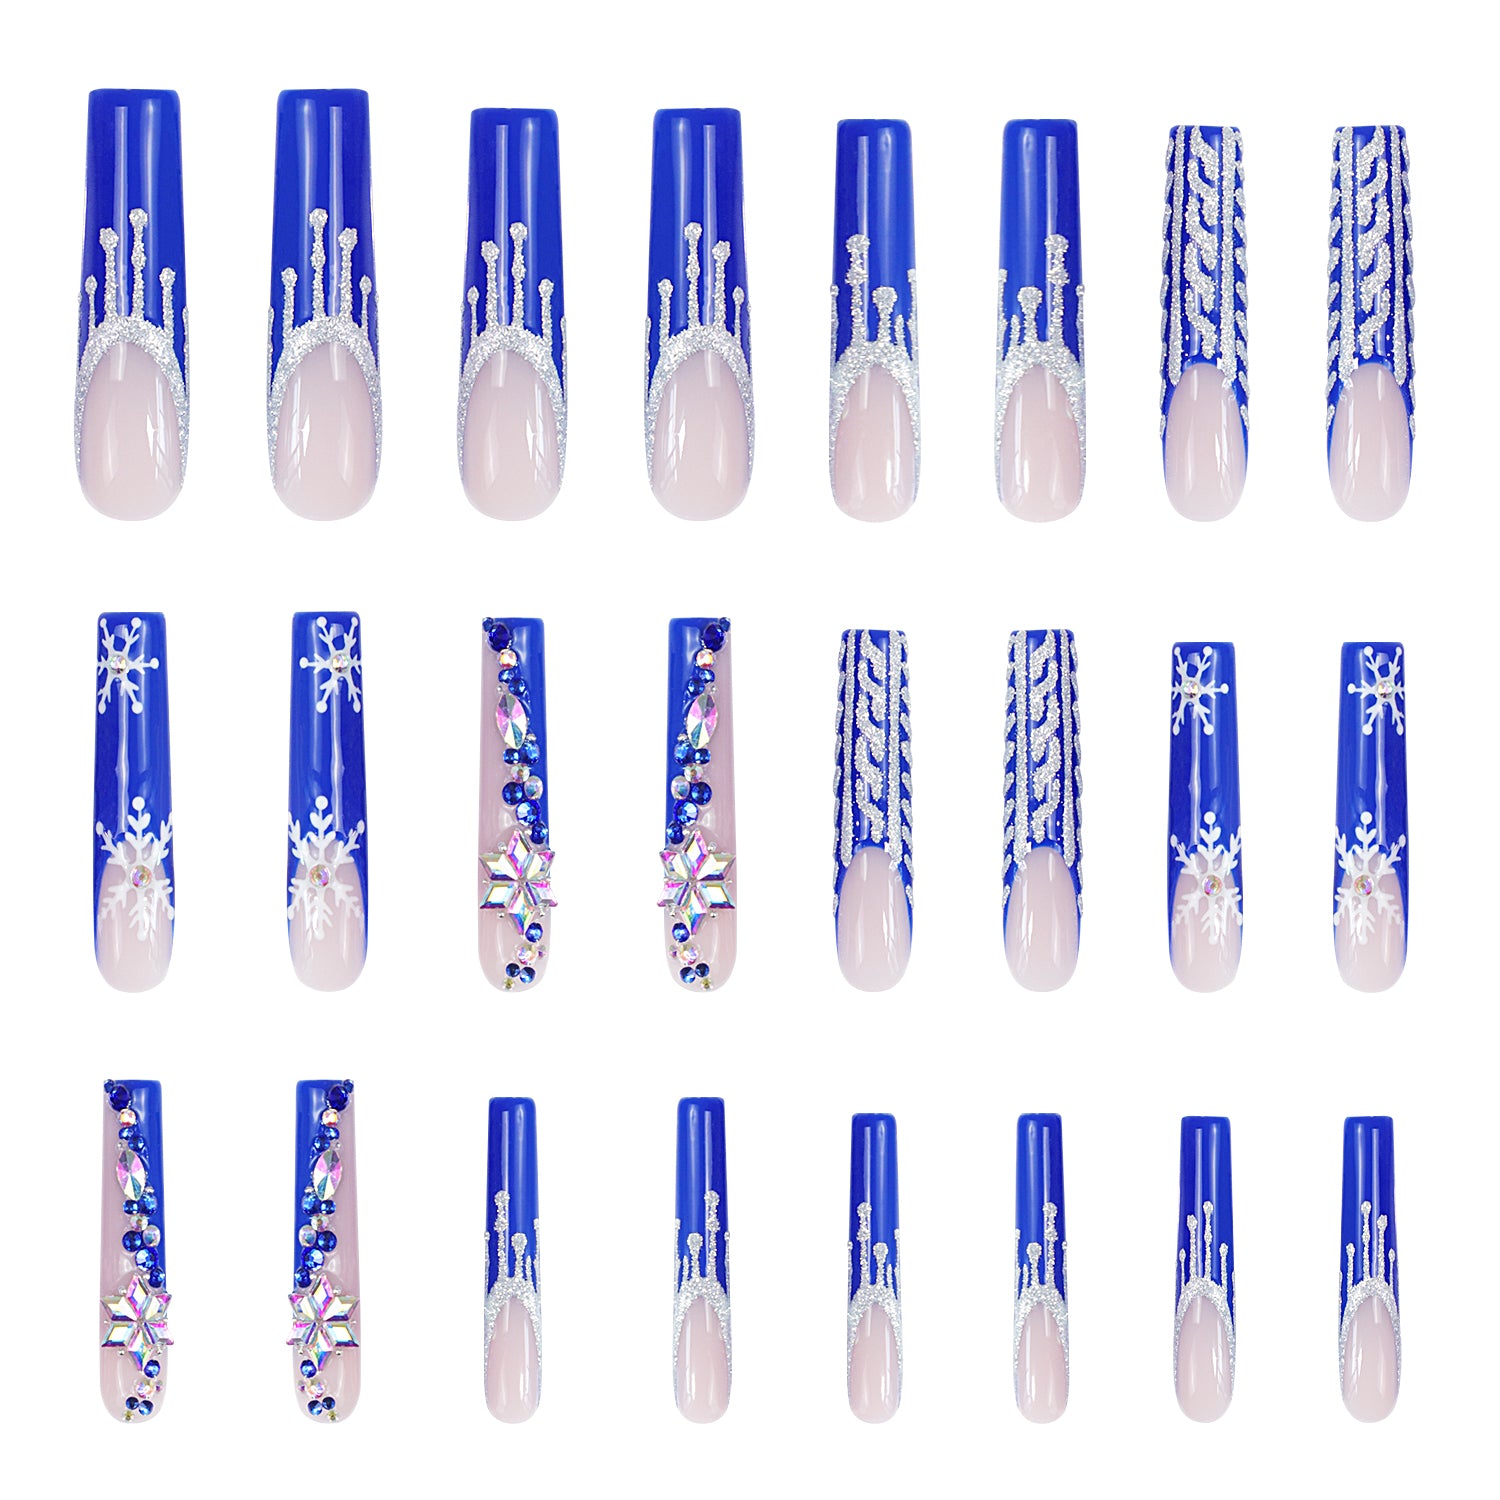 Set of 24 Snow Waltz Press-On Nails featuring blue French tips, white snowflakes, jeweled accents, and intricate winter-themed patterns. Perfect for holiday elegance and winter weddings.